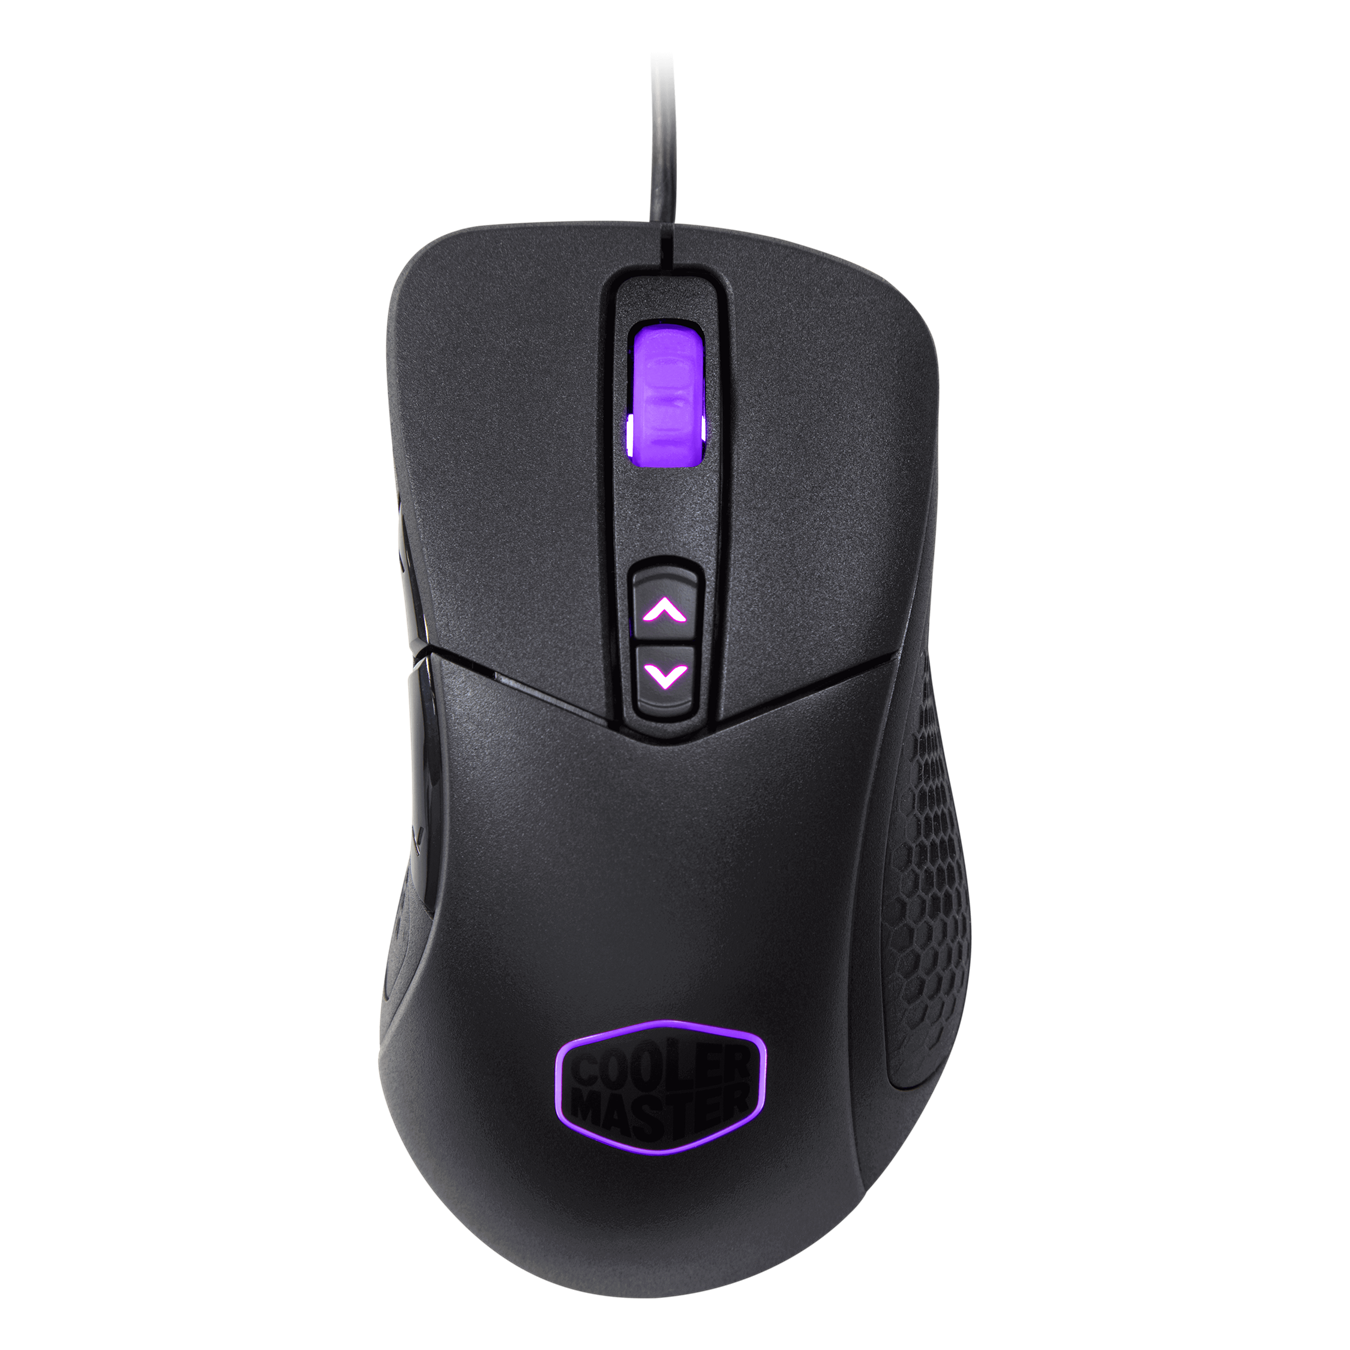 MasterMouse MM530 Gaming Mouse - Pixart PMW-3360Infrared sensor with adjustable DPI up to 12000 and zero negative accelaration or prediction for true 1-1 input which gamers prefer! 